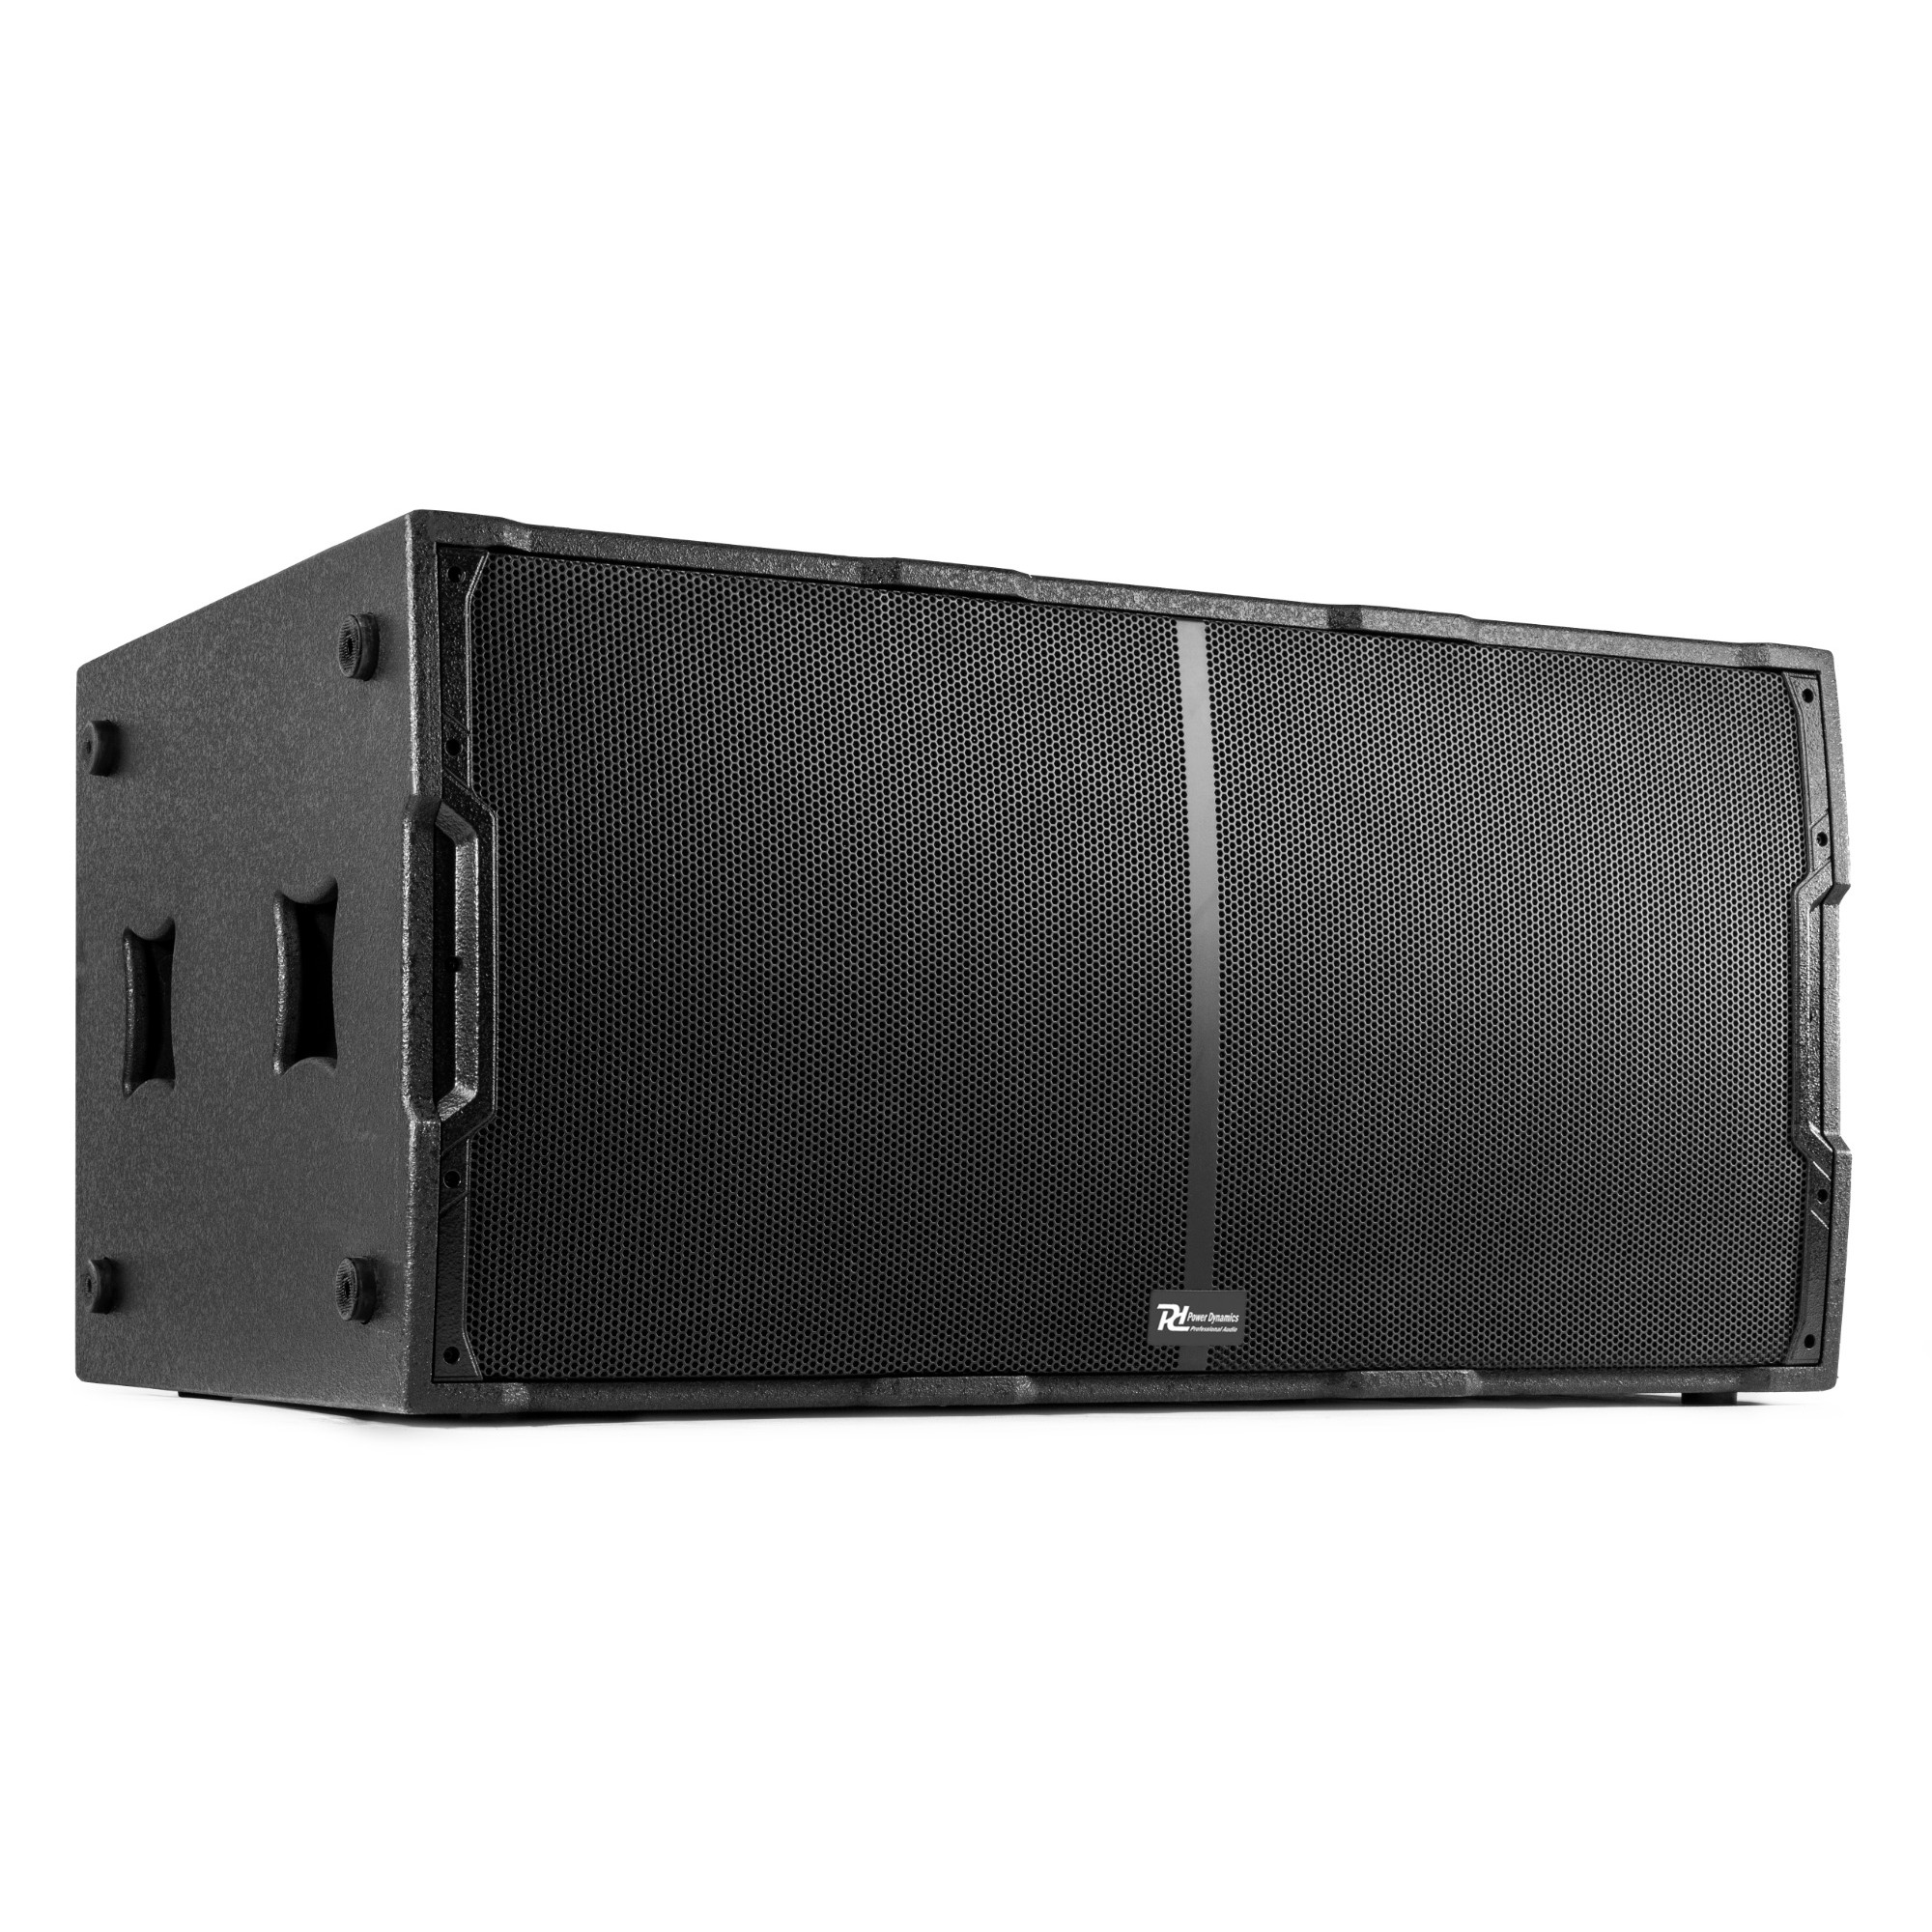 Power Dynamics - PDY2215S - Passieve subwoofer - 2 x 15 inch - 1800